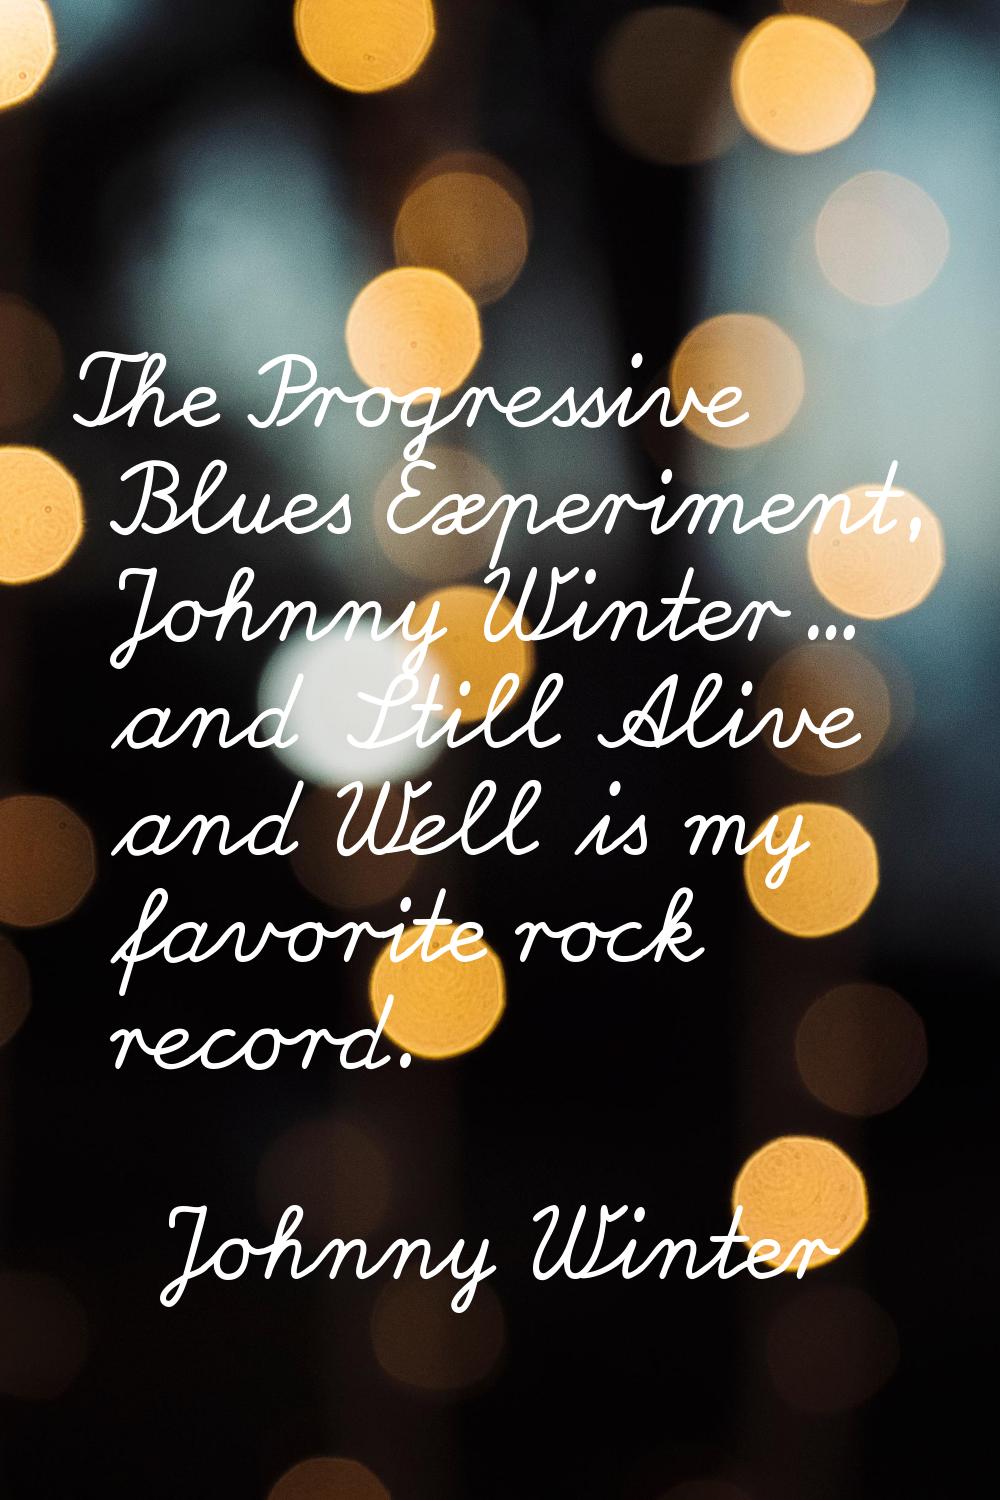 The Progressive Blues Experiment, Johnny Winter... and Still Alive and Well is my favorite rock rec